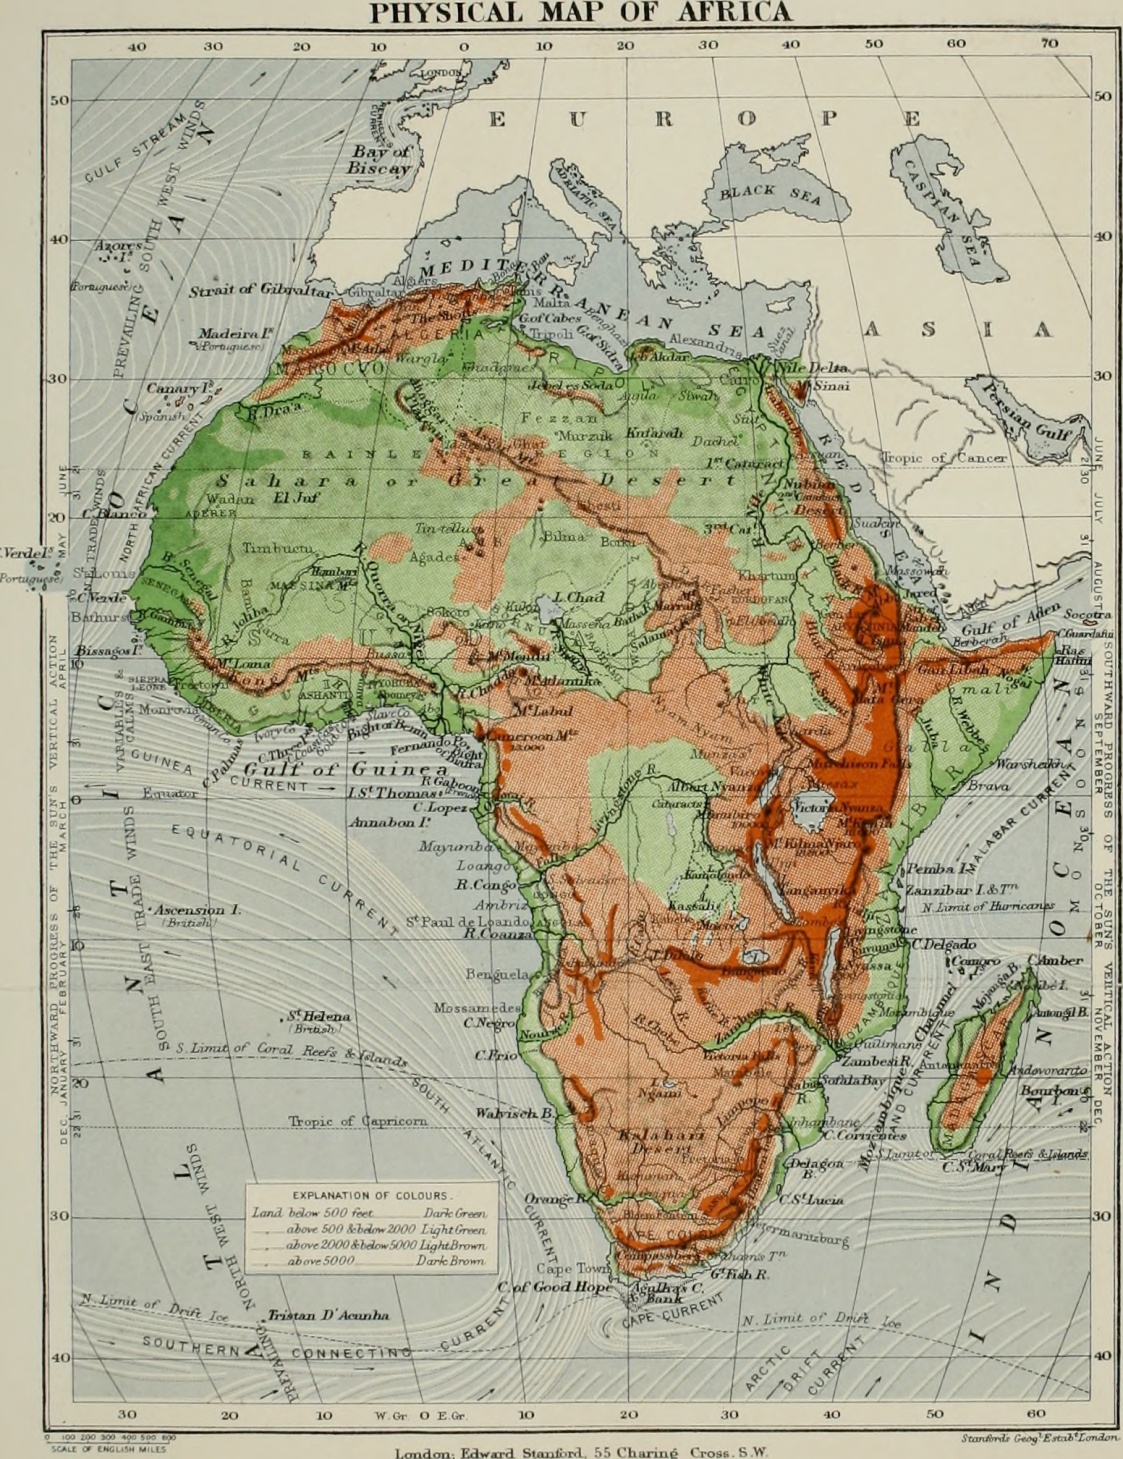 Alexander Keith Johnson and Augustus Henry Keane, Physical Map of Africa, 1878.